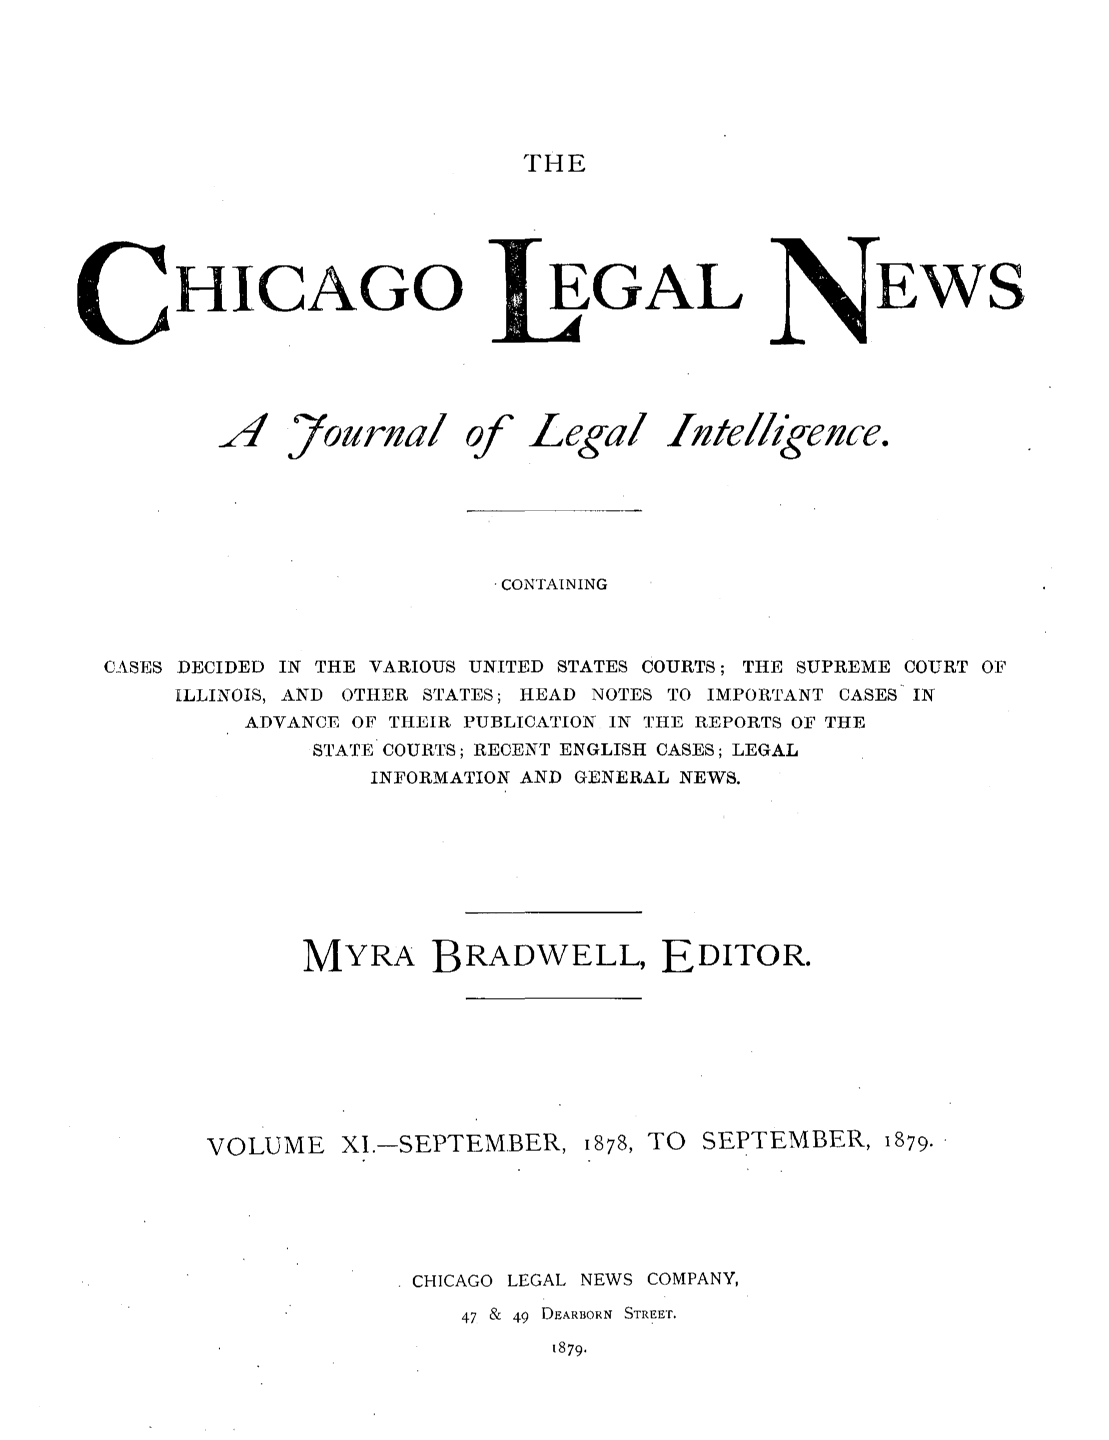 handle is hein.journals/chiclene11 and id is 1 raw text is: THEHICAGO ]AYournal ofEGALLegal IwteEWS/lkegence.CONTAININGCASES DECIDED IN THE VARIOUS UNITED STATES COURTS; THE SUPREME COURT OFILLINOIS, AND OTHER STATES; HEAD NOTES TO IMPORTANT CASES INADVANCE OF THEIR PUBLICATION IN THE REPORTS OF THESTATE COURTS; RECENT ENGLISH CASES; LEGALINFORMATION AND GENERAL NEWS.MYRA BRADWELL, EDITOR.VOLUME XI.-SEPTEMBER,1878, TO SEPTEMBER, 1879.CHICAGO LEGAL NEWS COMPANY,47 & 49 DEARBORN STREET.1879.